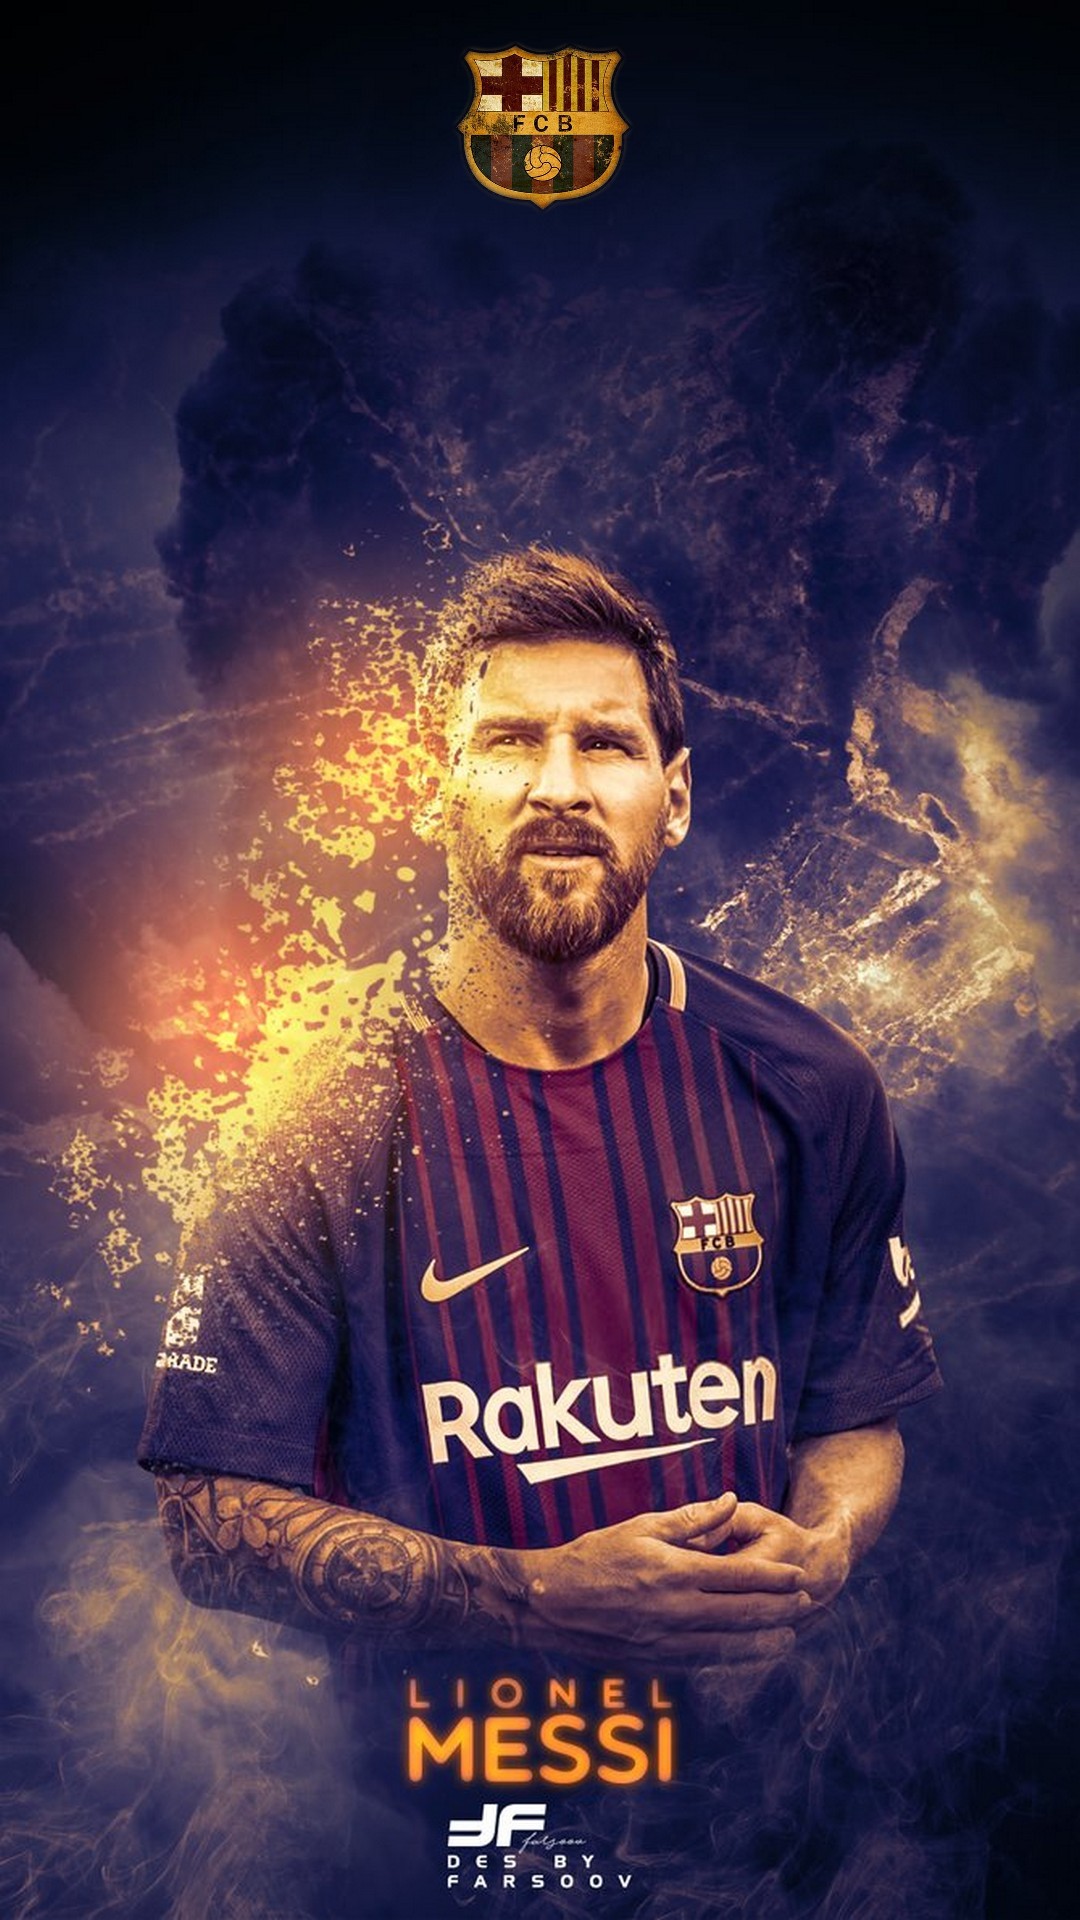 Leo Messi HD Wallpaper For iPhone with resolution 1080x1920 pixel. You can make this wallpaper for your Mac or Windows Desktop Background, iPhone, Android or Tablet and another Smartphone device